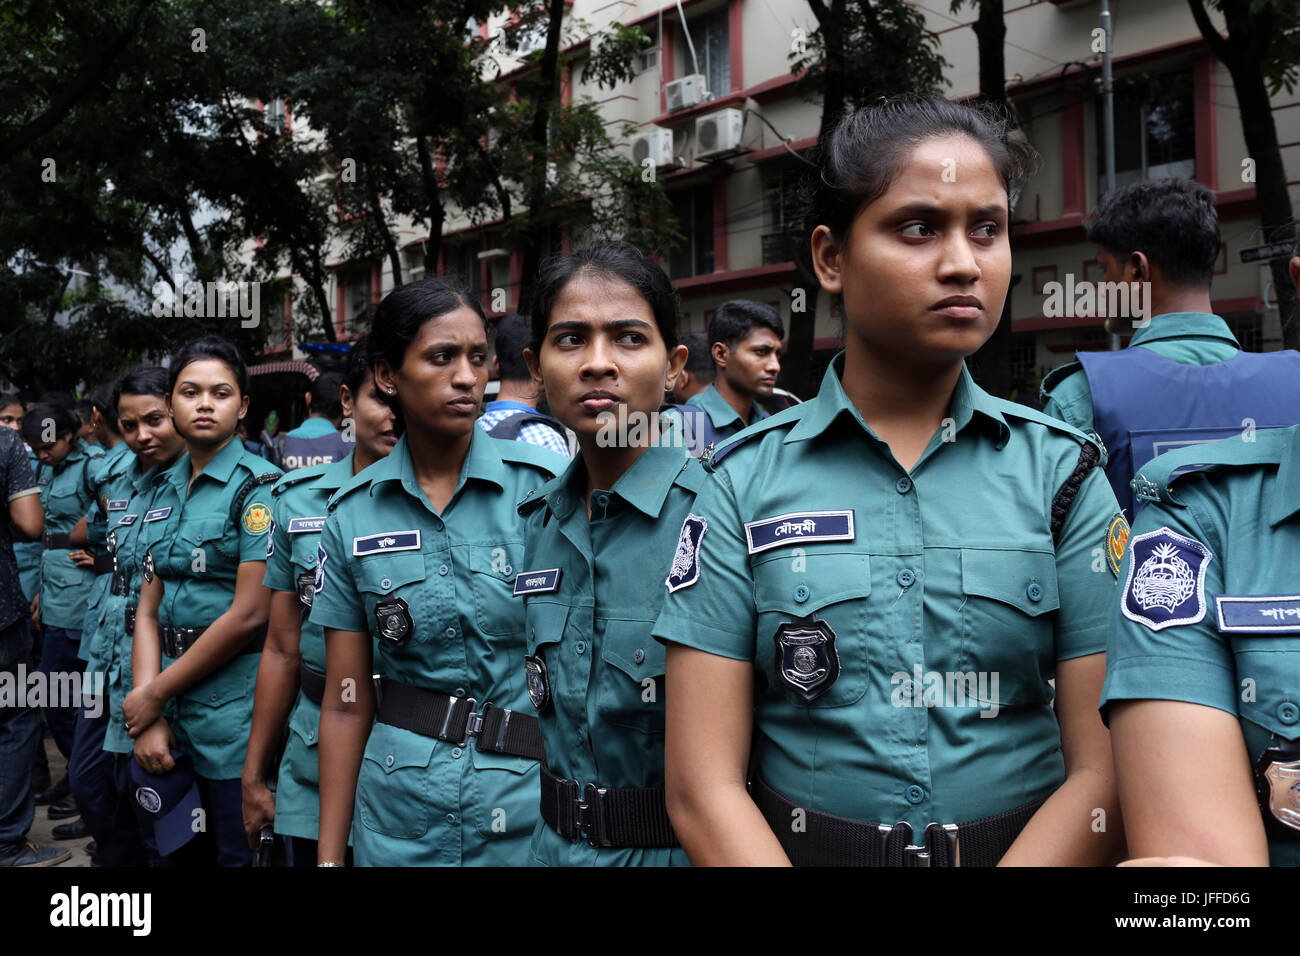 Dhaka, Bangladesh. 02nd July, 2016. Women police protest journalist and media during the time of Dhaka attack. The follower of Islamic State ideology, five Bangladeshi terrorists attacked a restaurant named Holey Artisan Bakery in Dhaka during night around 9:20 pm. People were eating dinner, the assailants were armed and killed a total of 22 people in which 18 were foreigners, and the rest were local Bangladeshis. Credit: Kazi Salahuddin Razu/Pacific Press/Alamy Live News Stock Photo